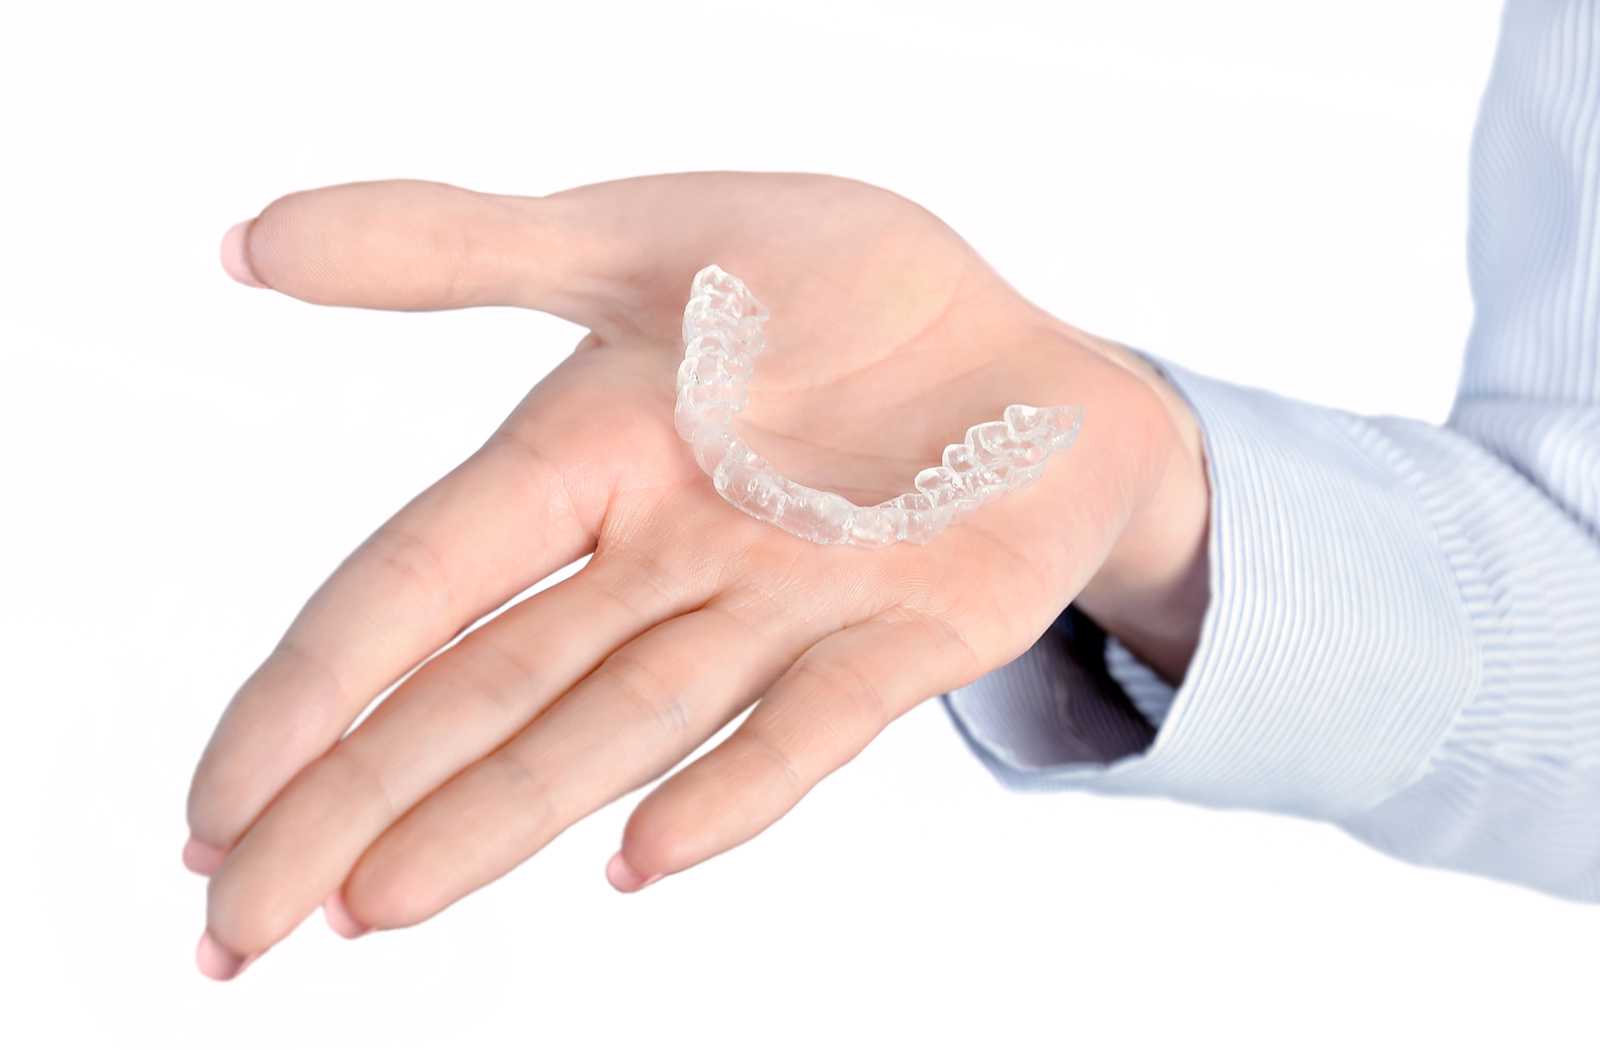 hand on white background holding out clear dental nightguard